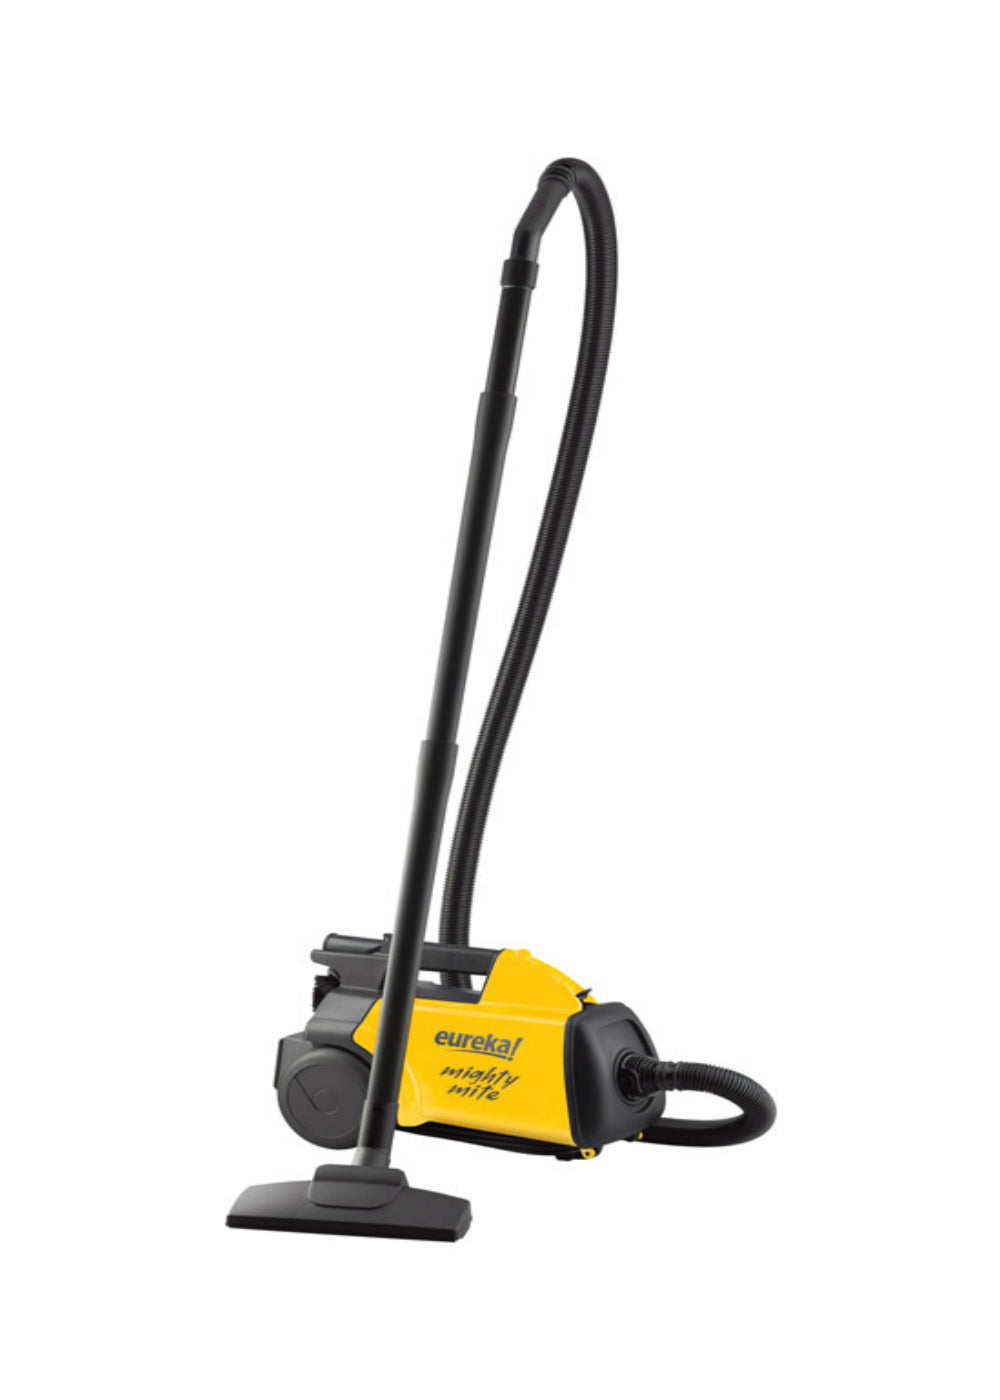 Eureka 3670g Mighty Mite Canister Vacuum, 12 Amp